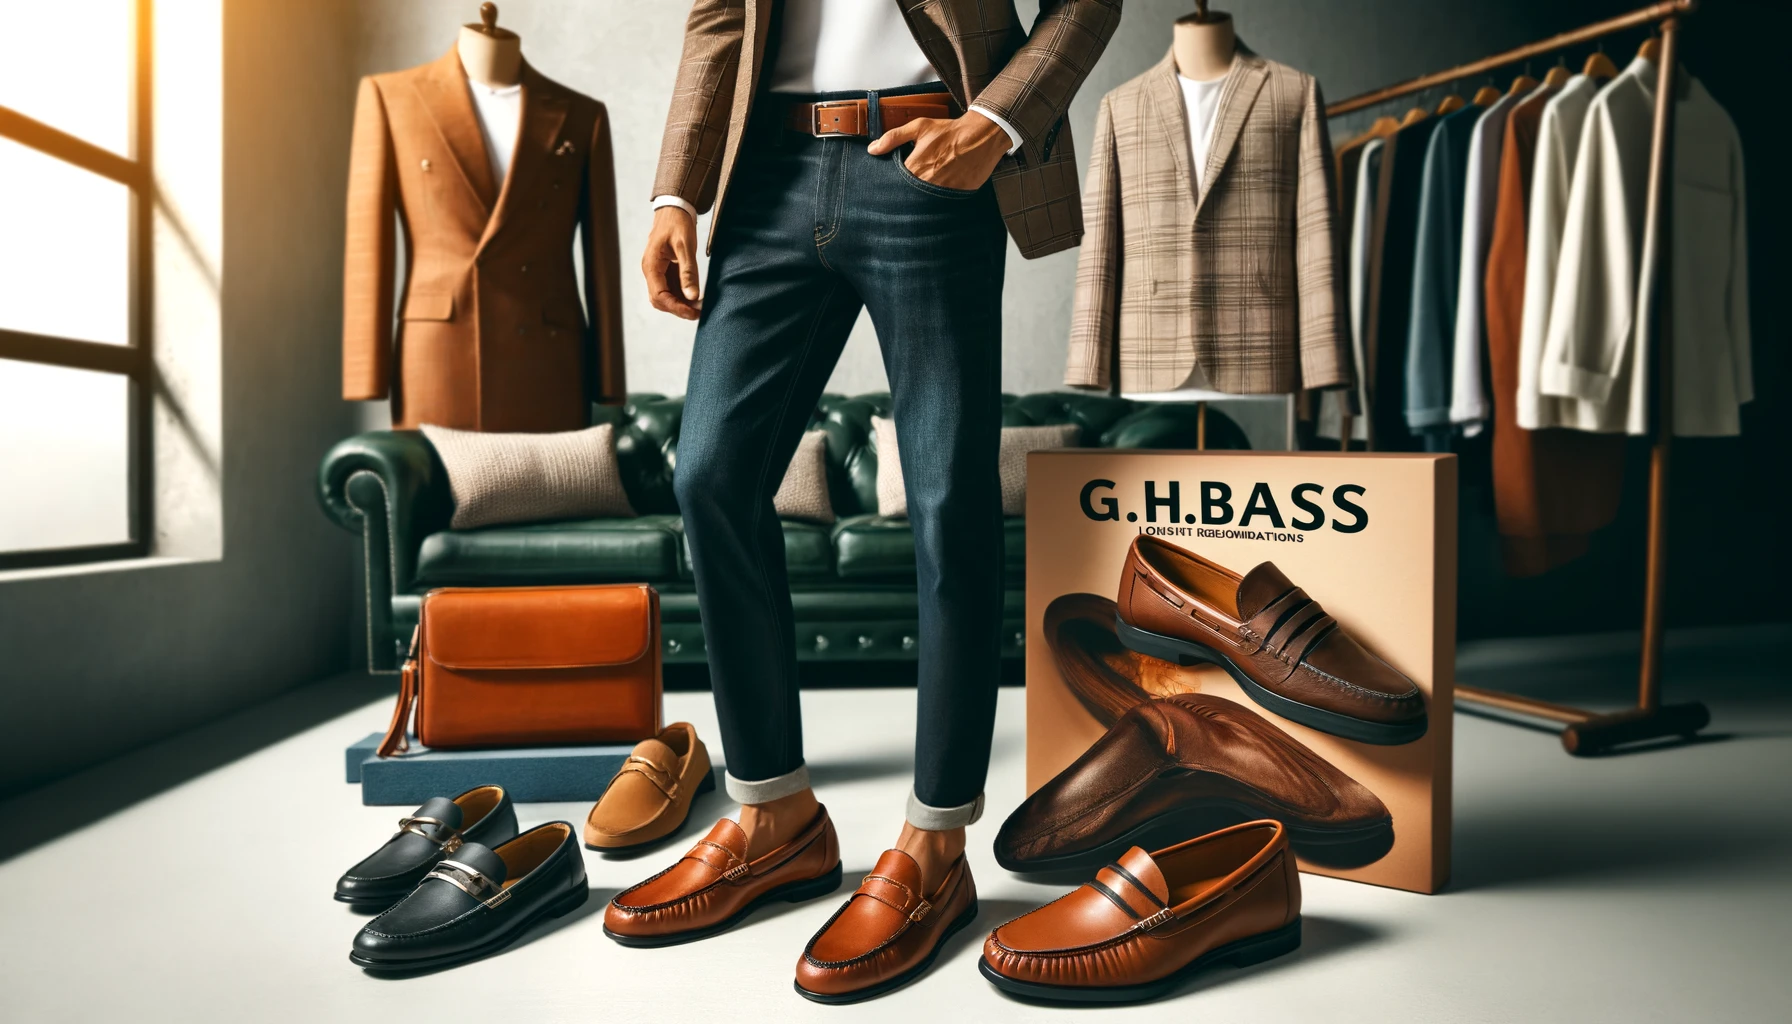 A fashionable display of outfit recommendations featuring G.H.BASS leather loafers. The image showcases different outfit ideas for both casual and formal occasions, pairing the loafers with various clothing items like jeans, suits, and dresses. The background is stylish and modern, highlighting the versatility of the loafers. Include the text 'G.H.BASS' prominently in the image.